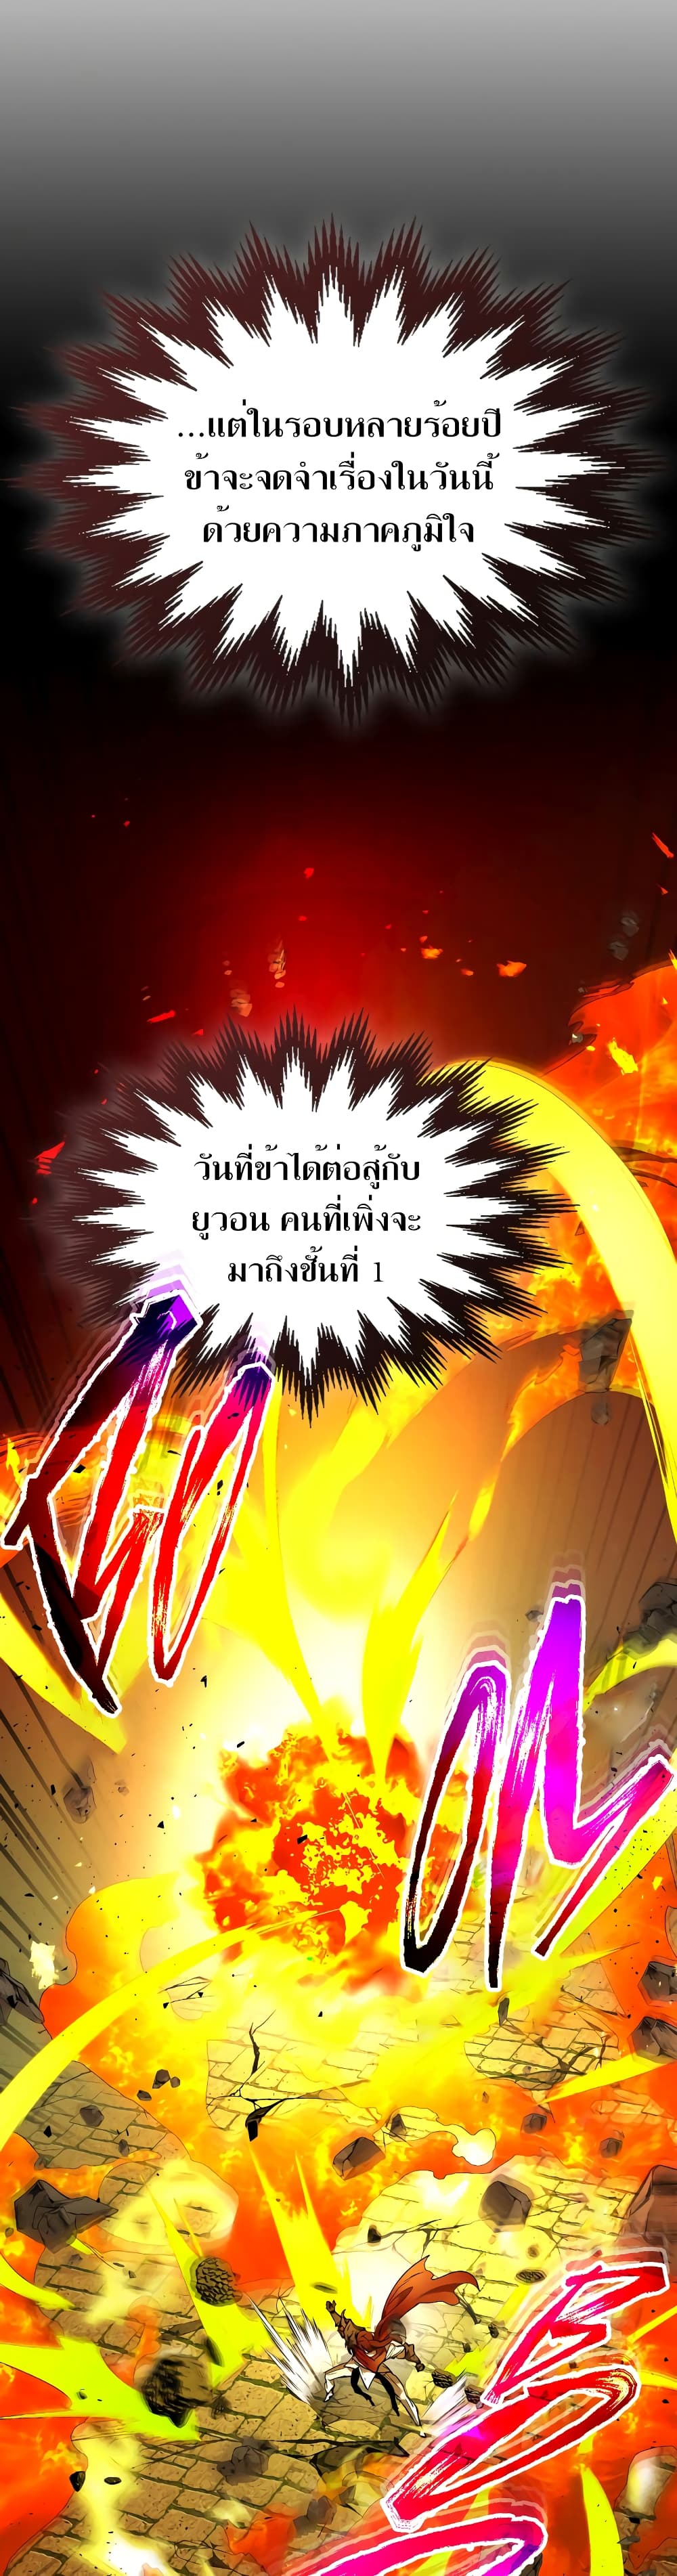 Leveling With The Gods 30 แปลไทย